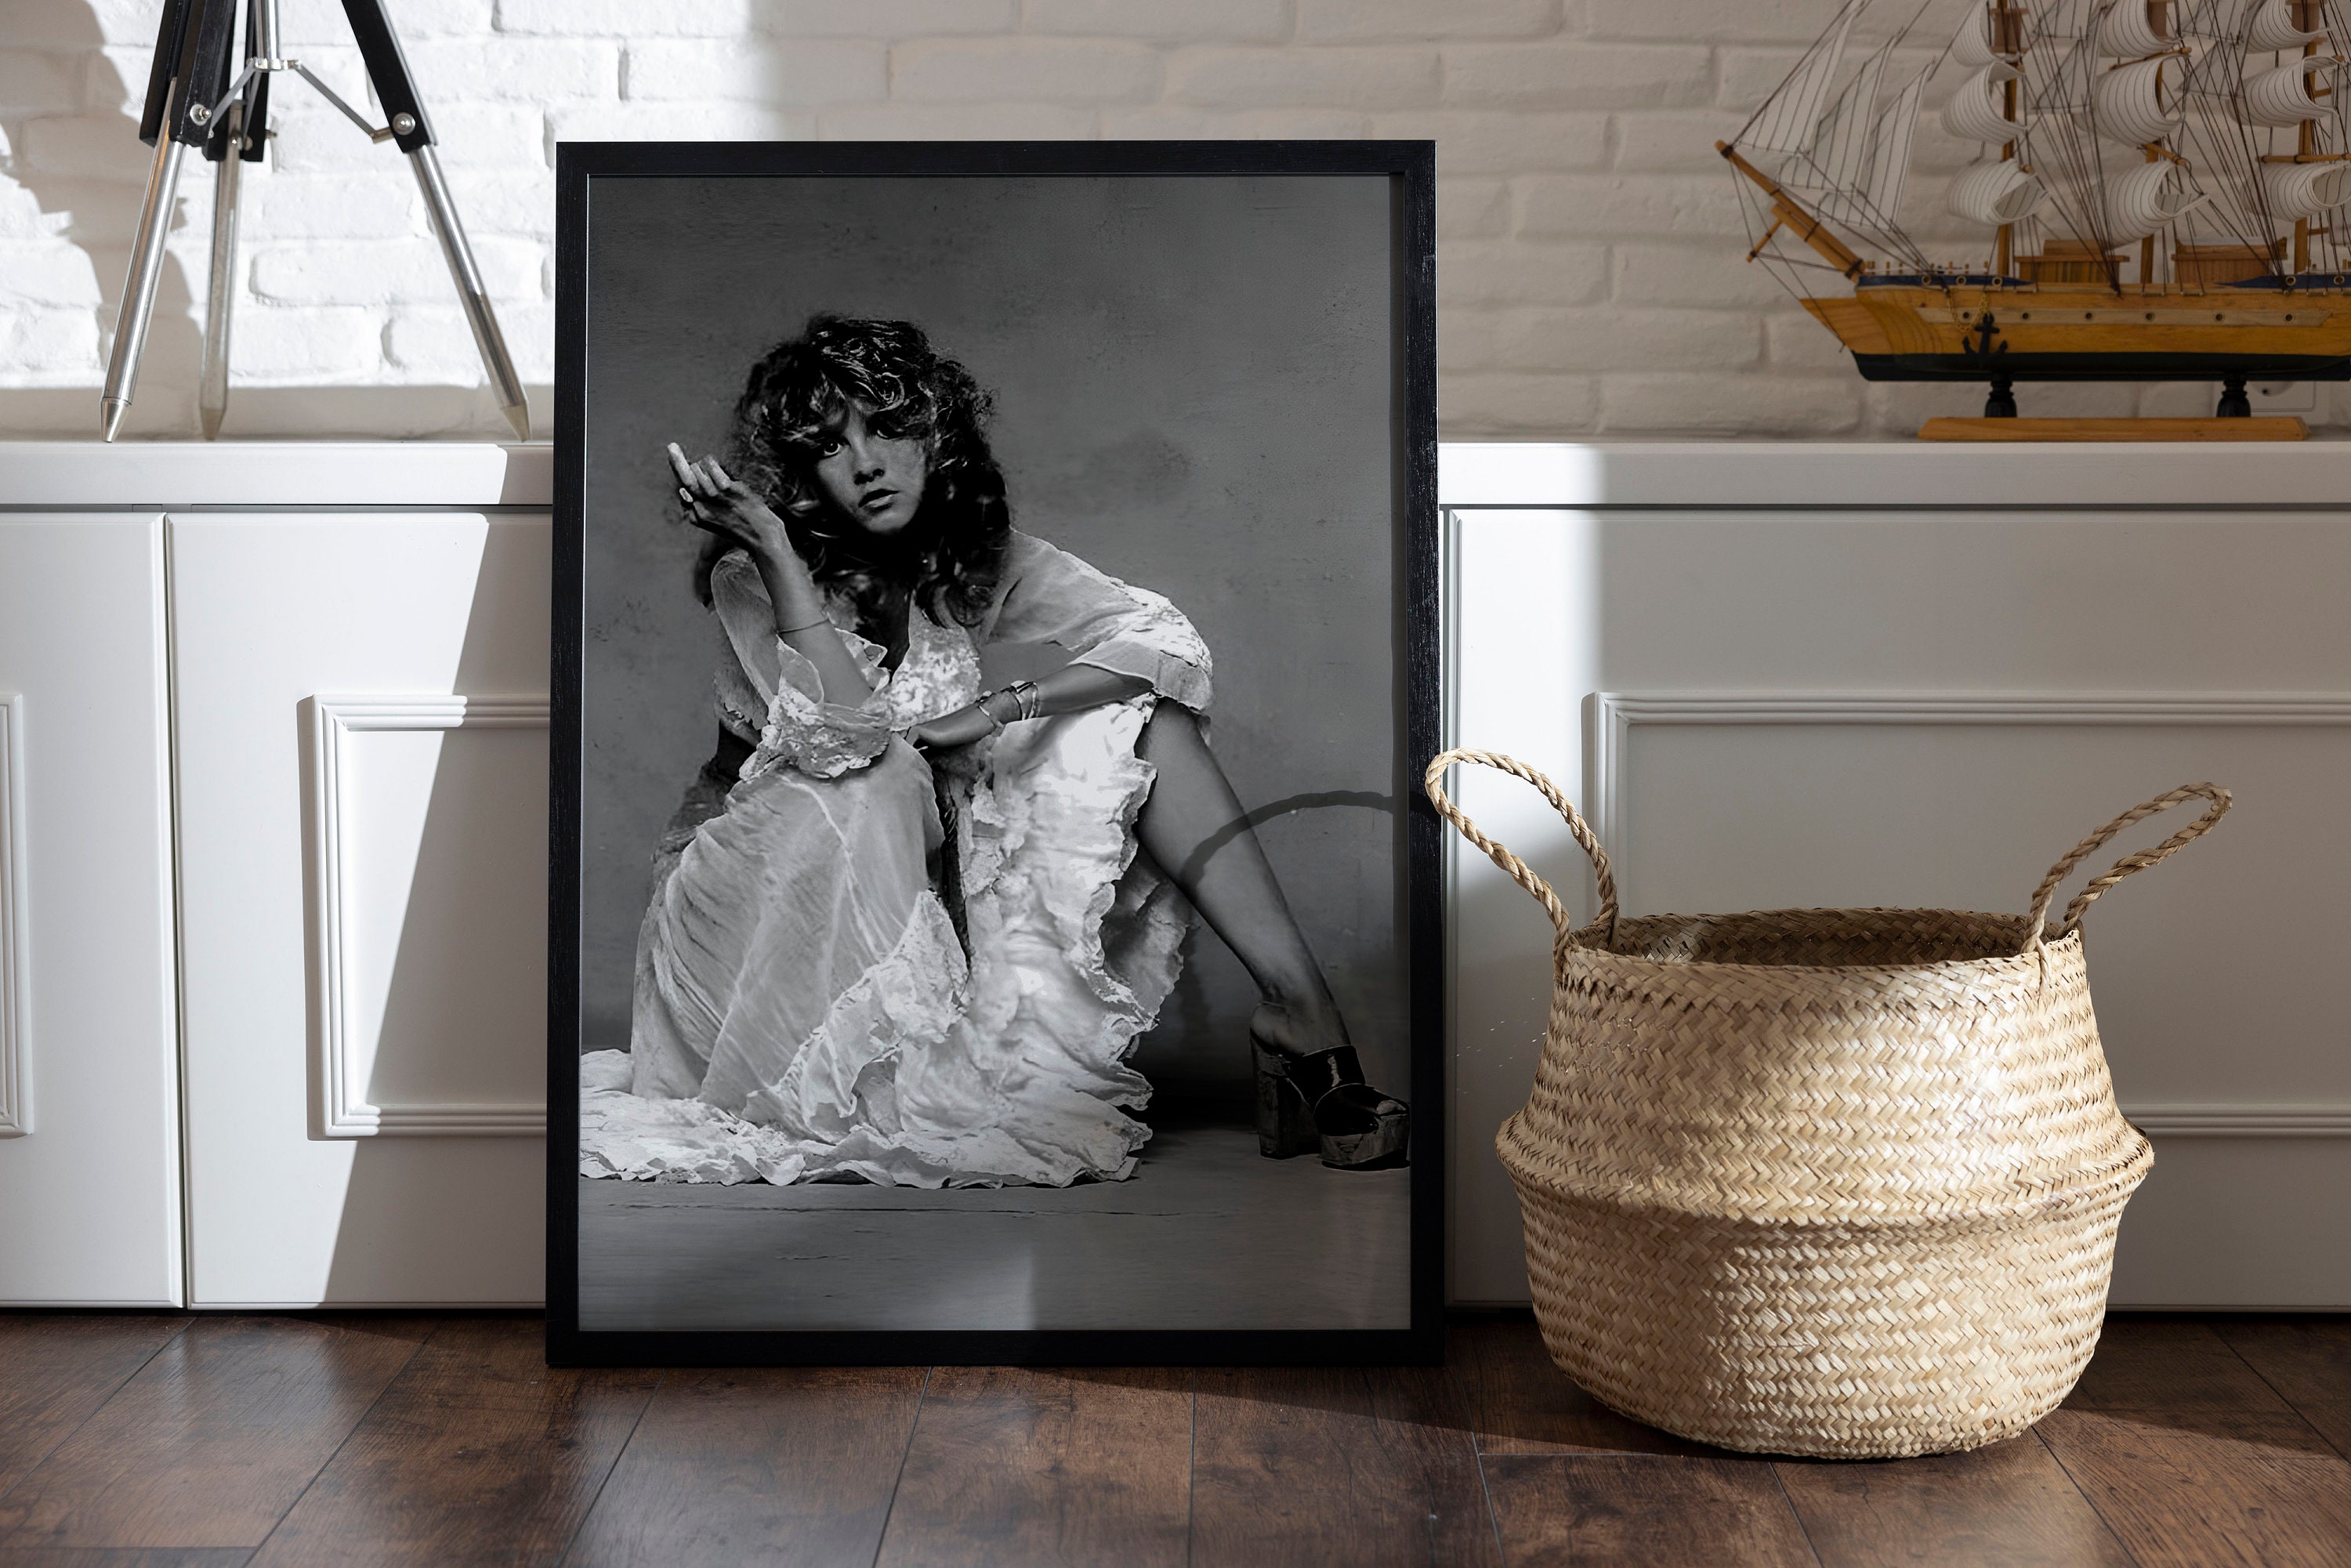 Stevie Nicks Music Poster,, Canvas Painting, Living Room, Home Decor,